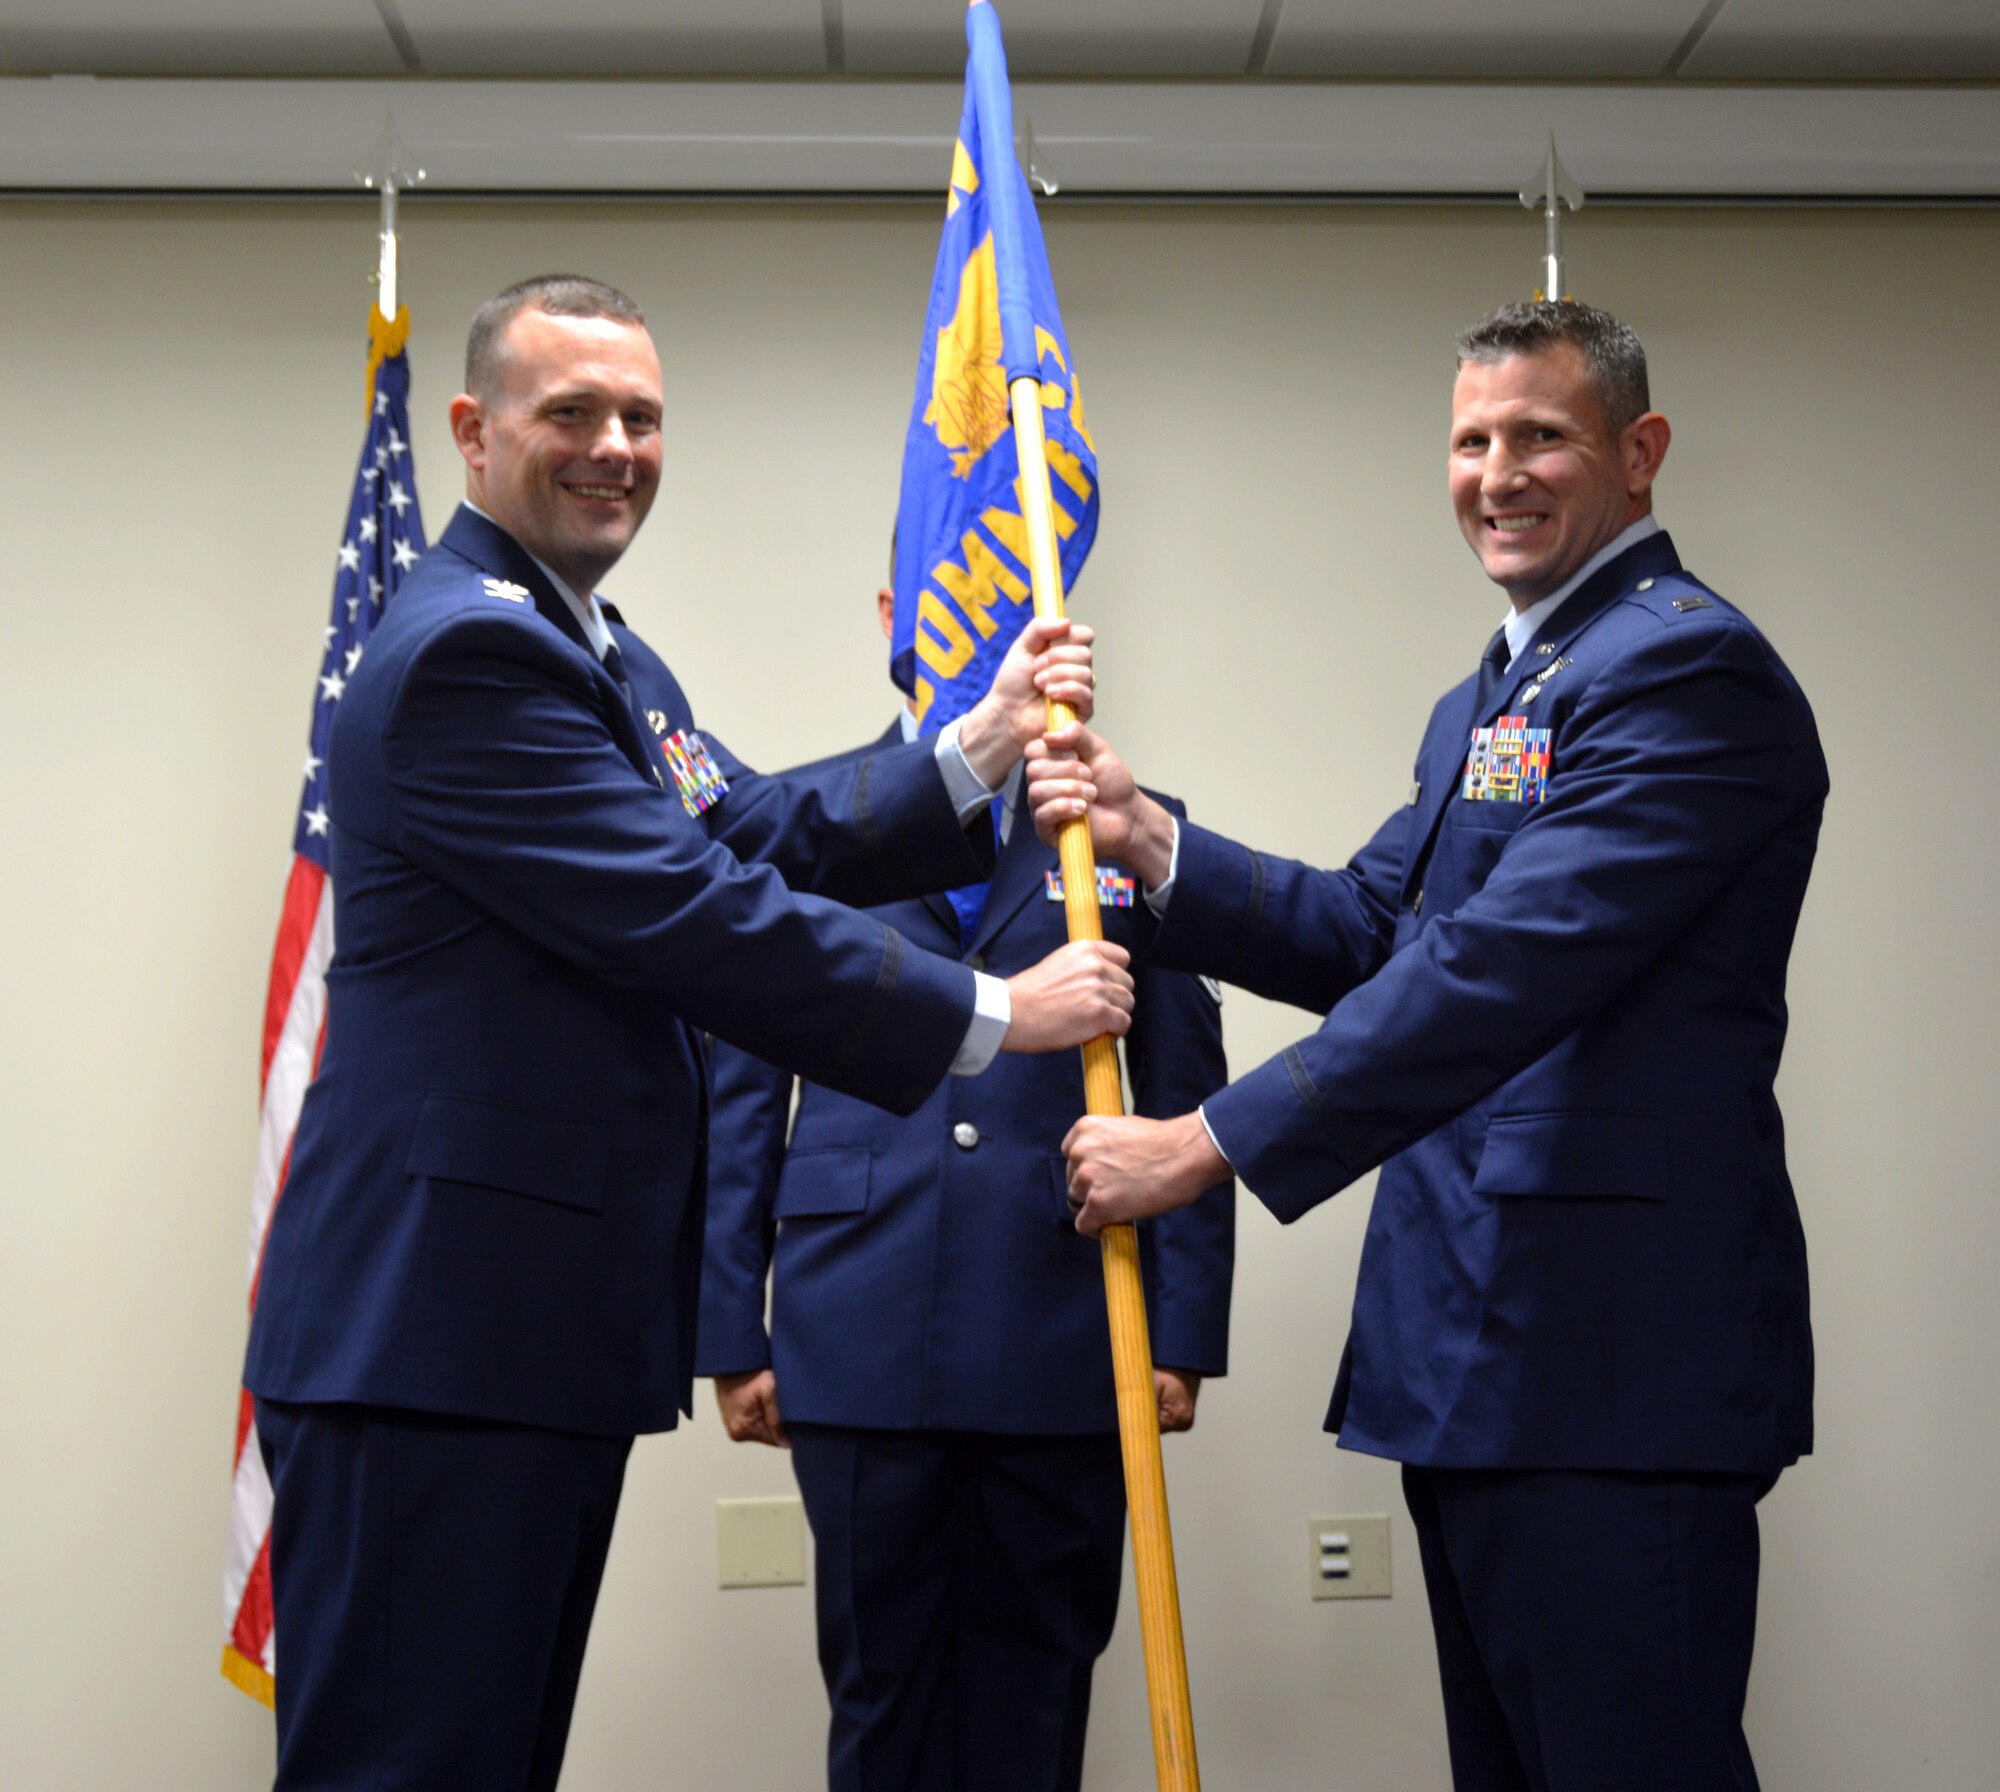 New commander is "fired up" to lead 125 CF